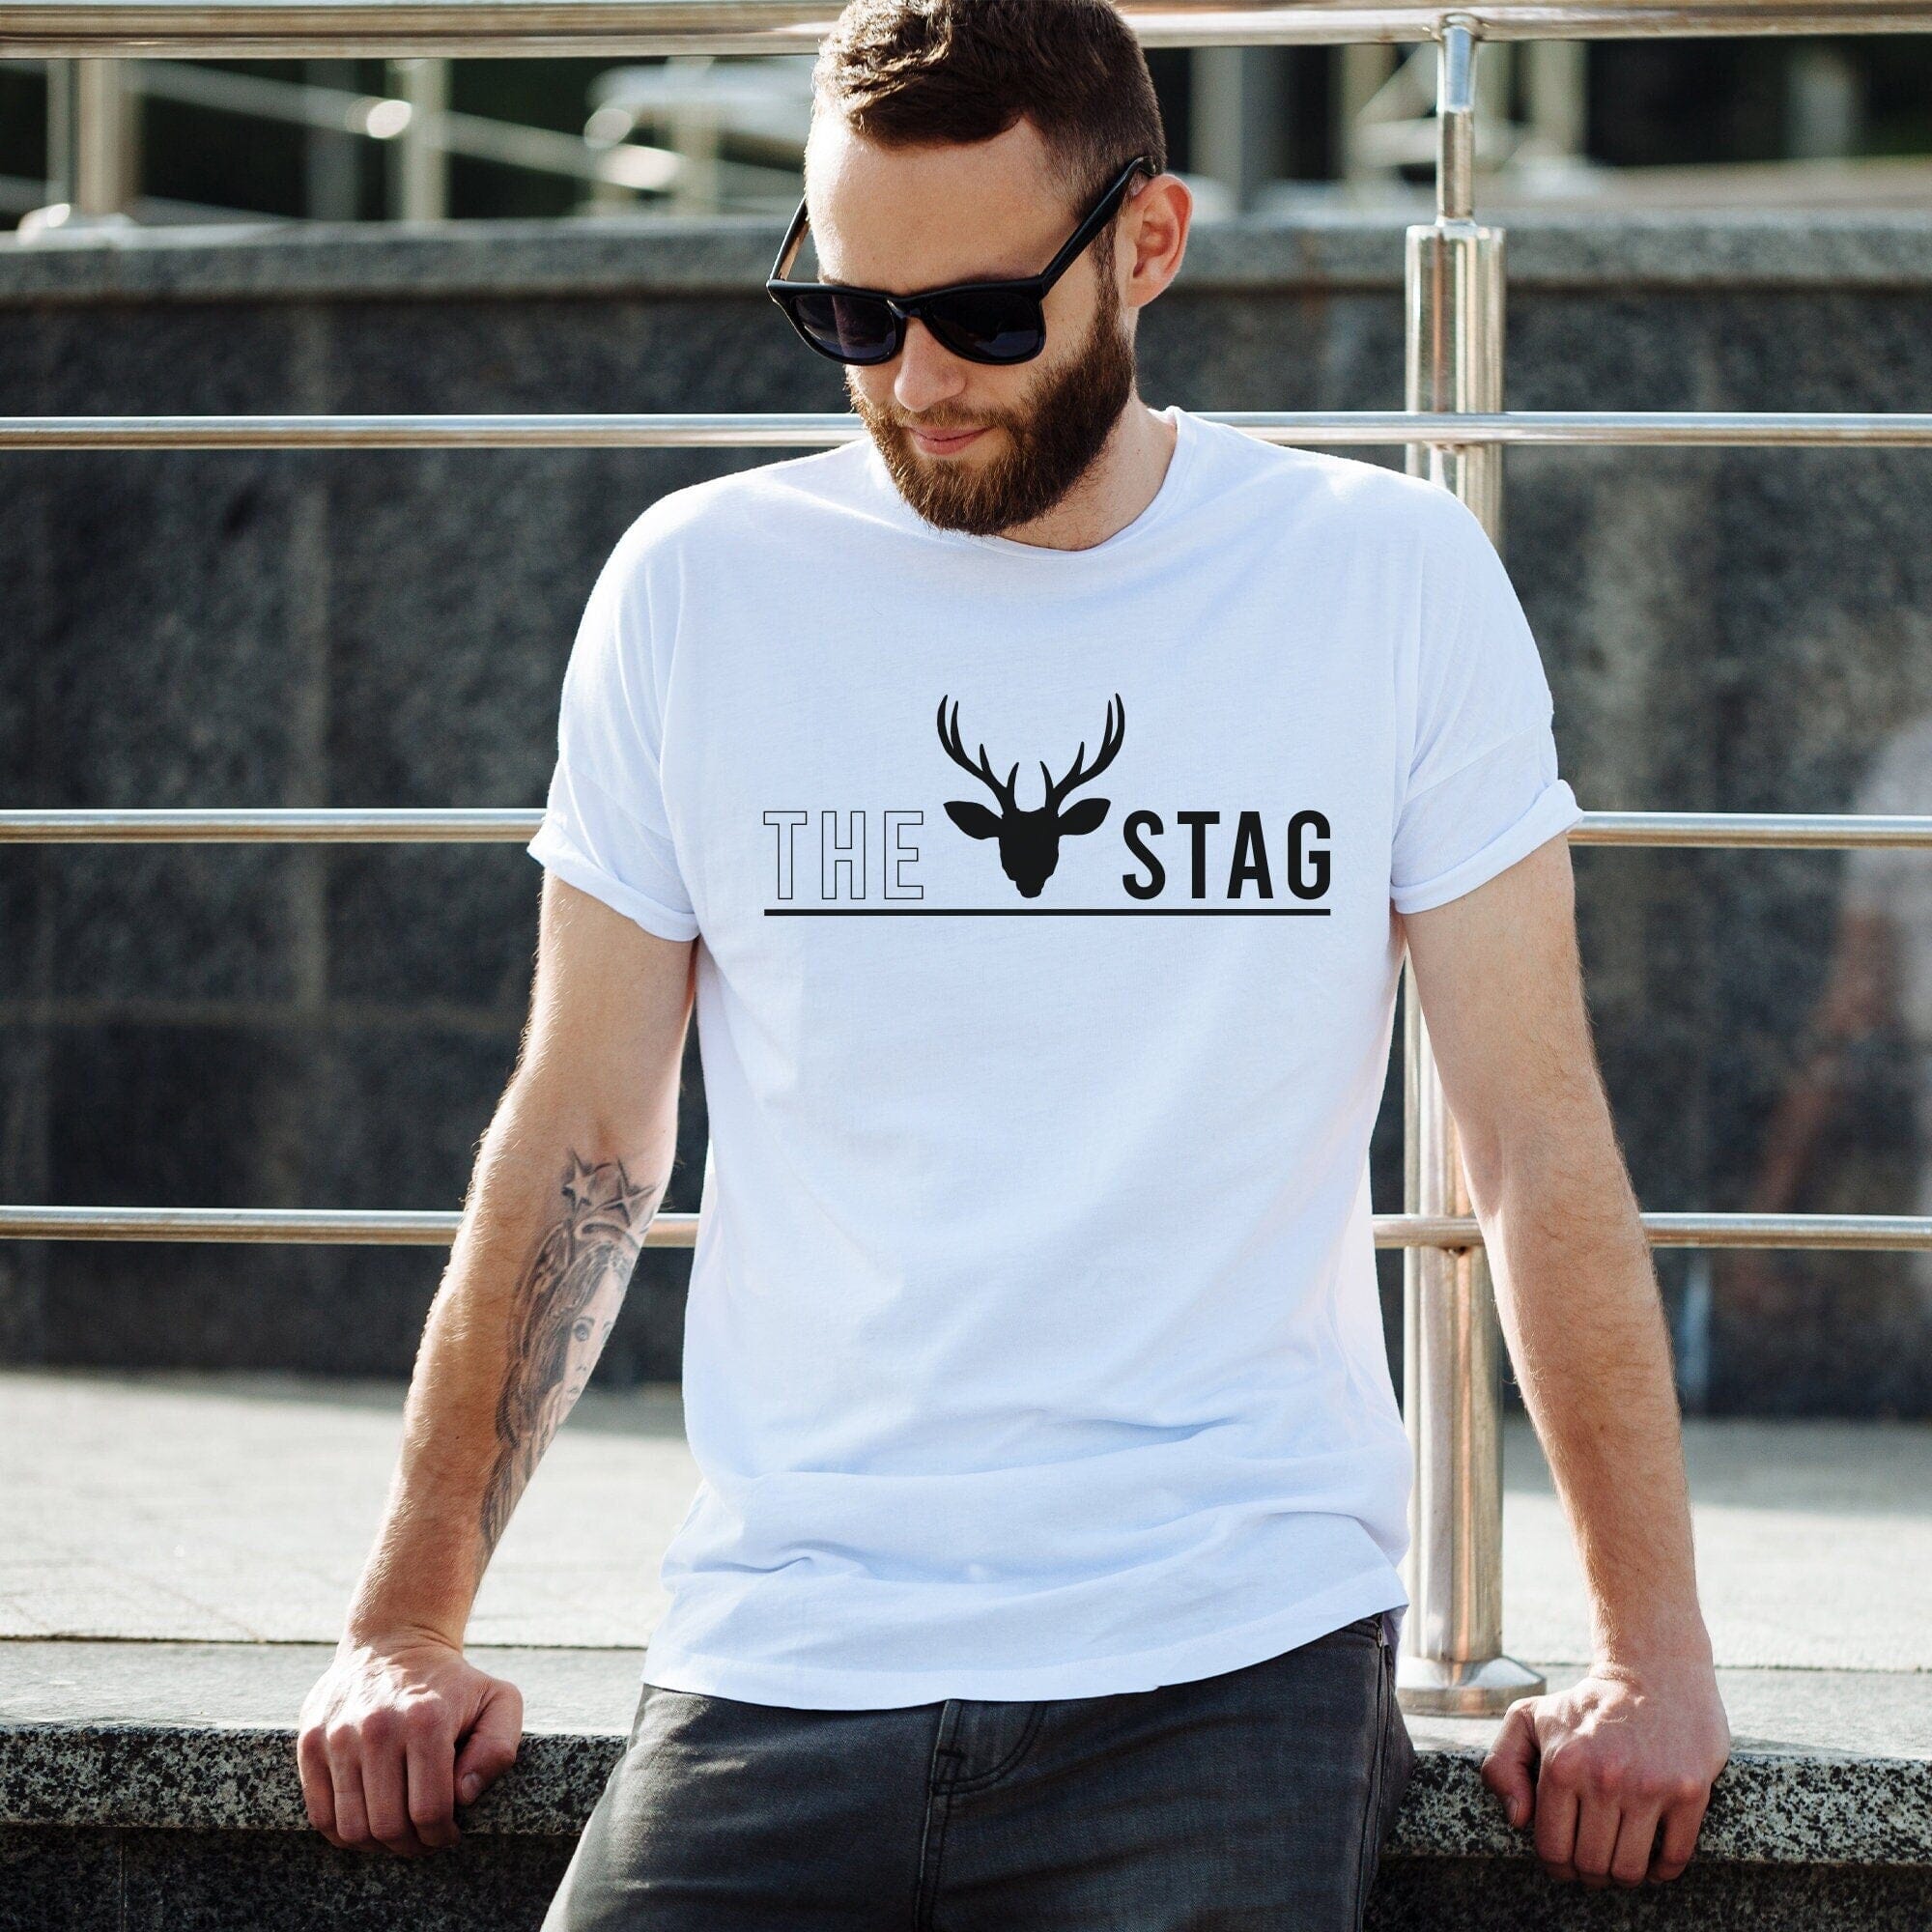 The Stag T-Shirt, Groom Gift, Funny Men'S Stag Night Tee, Stag Do, Honeymoon Engagement Outfit